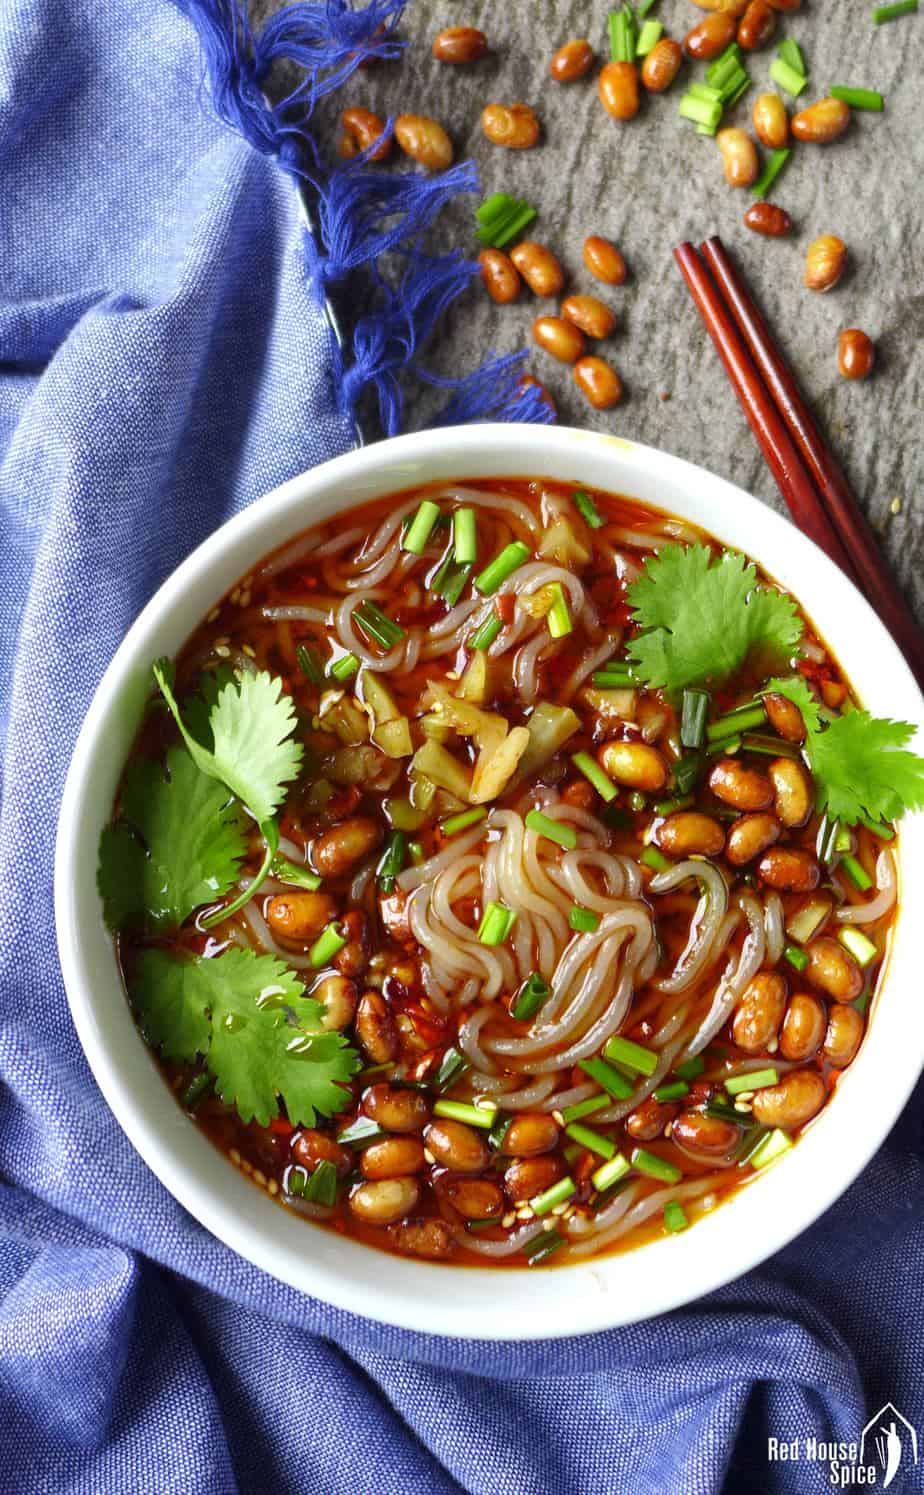 Slippery noodles in a tangy soup, hot and sour glass noodle soup is irresistible but easy to prepare. A classic Chinese dish you ought to try.